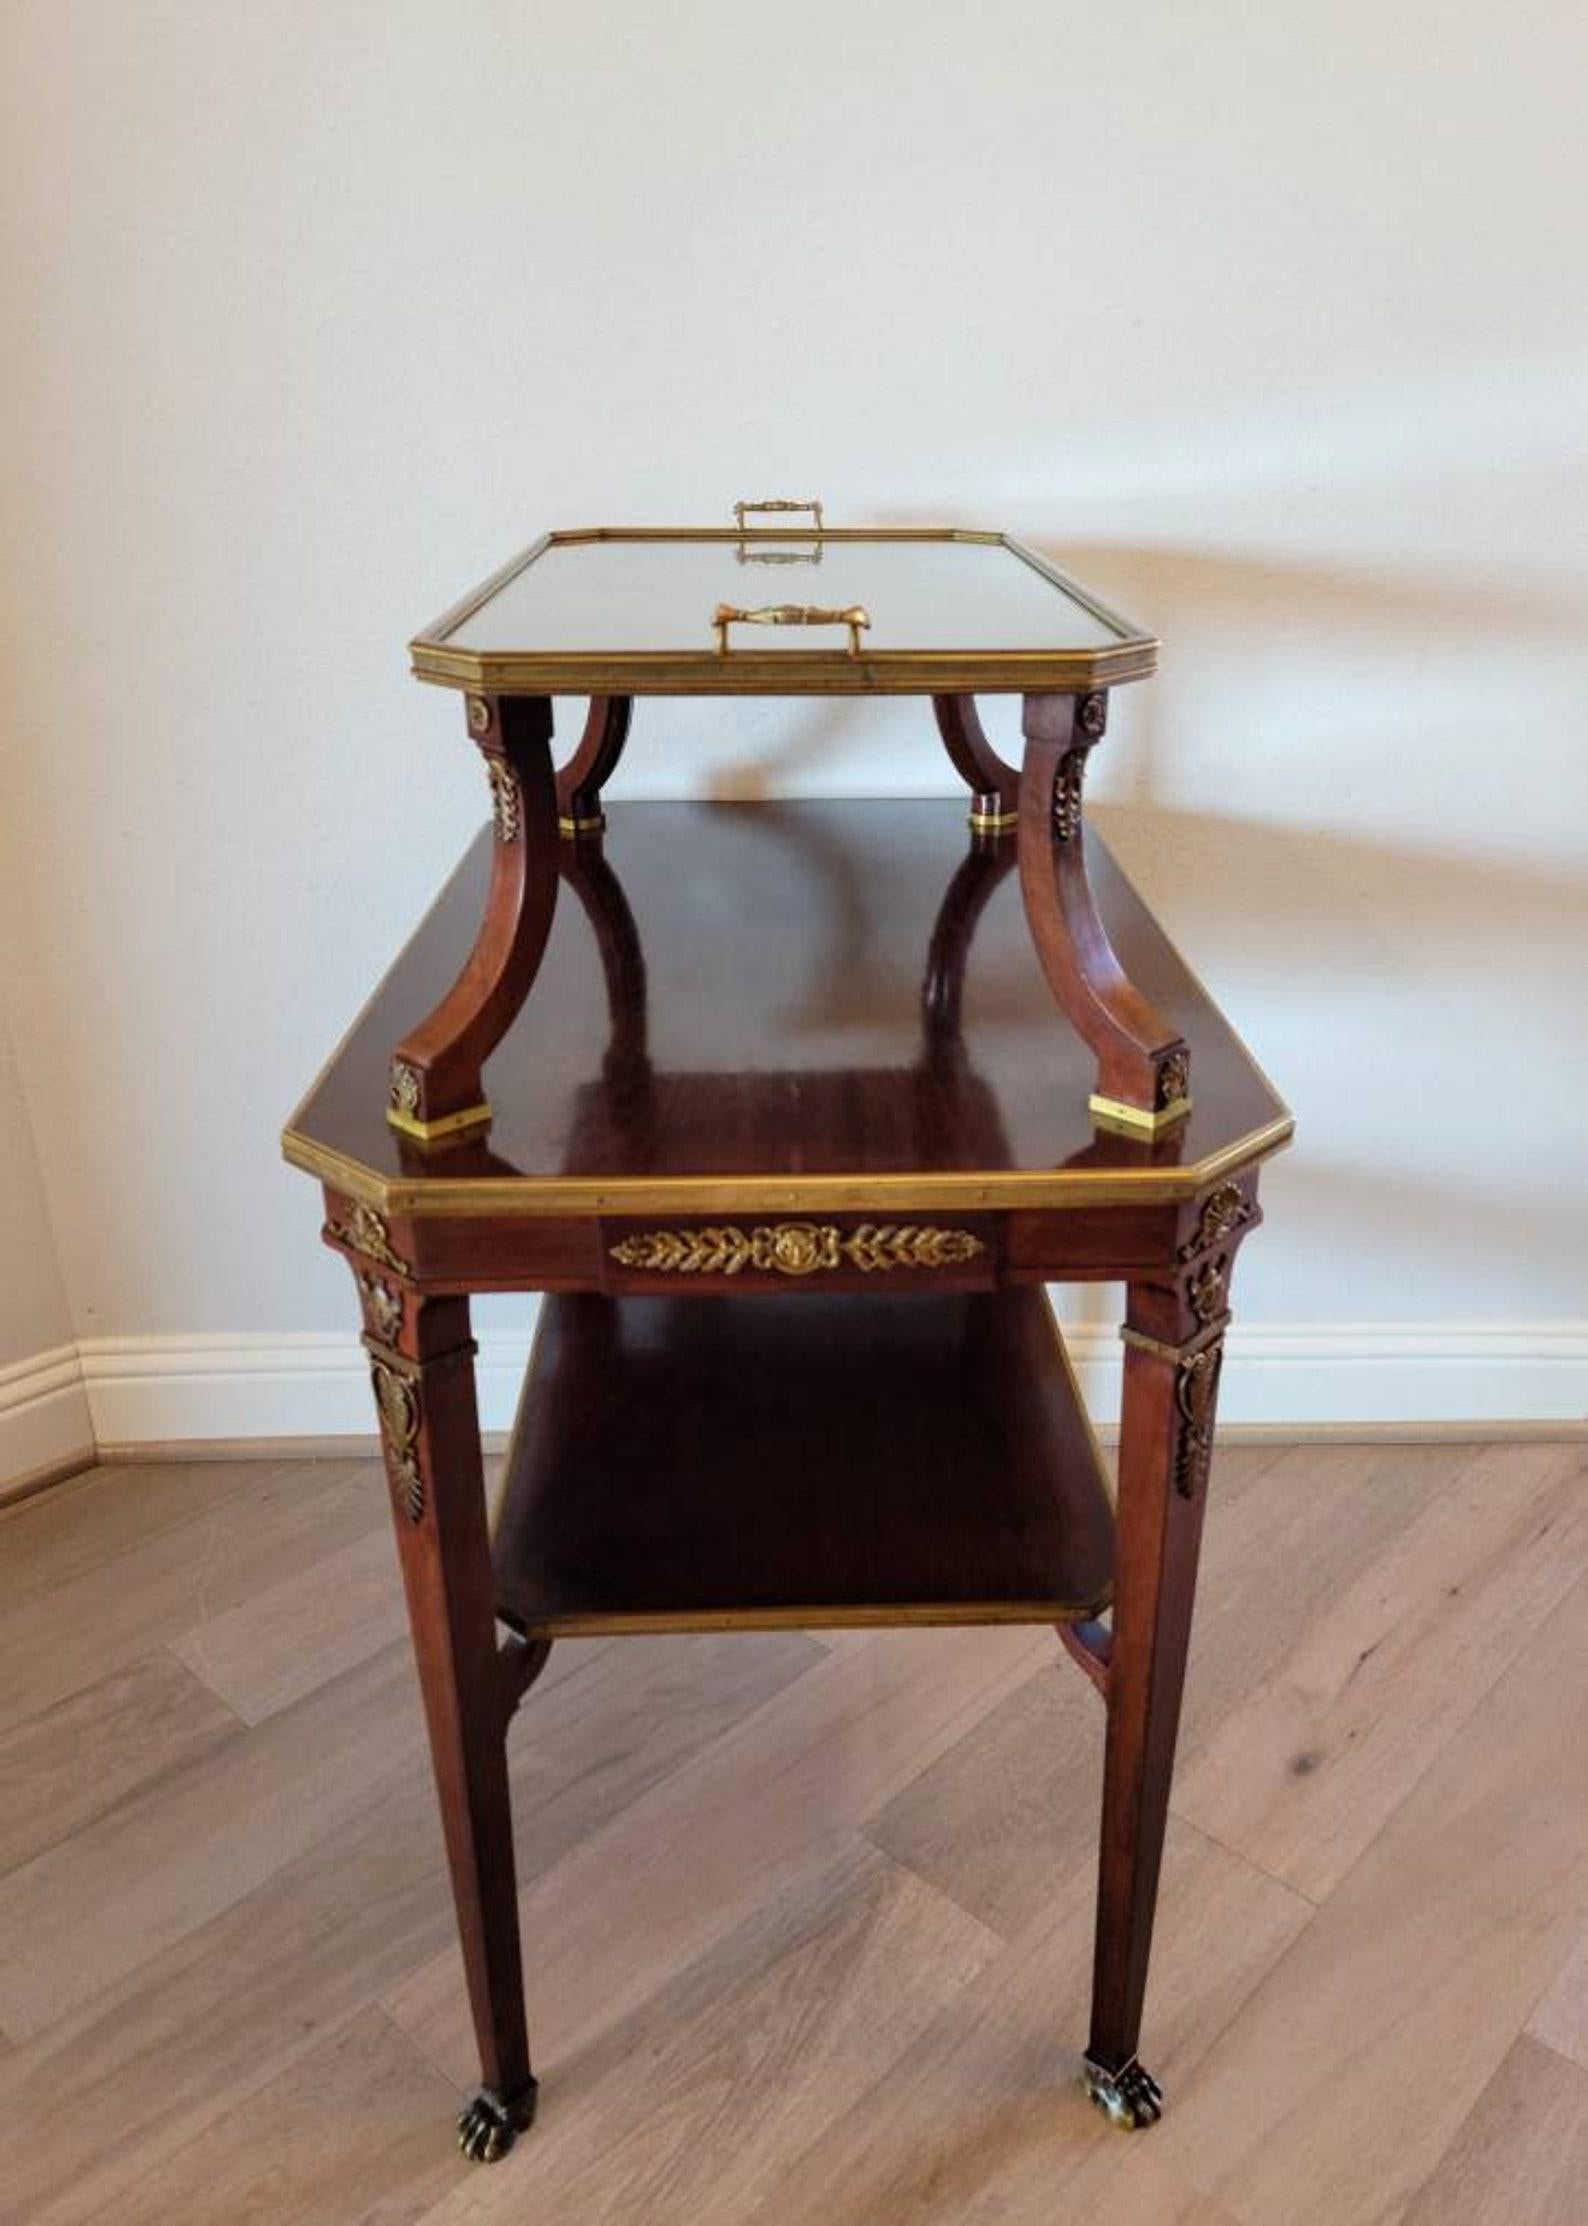 Gilt Krieger Signed Antique French Empire Tiered Tea Tray Table For Sale